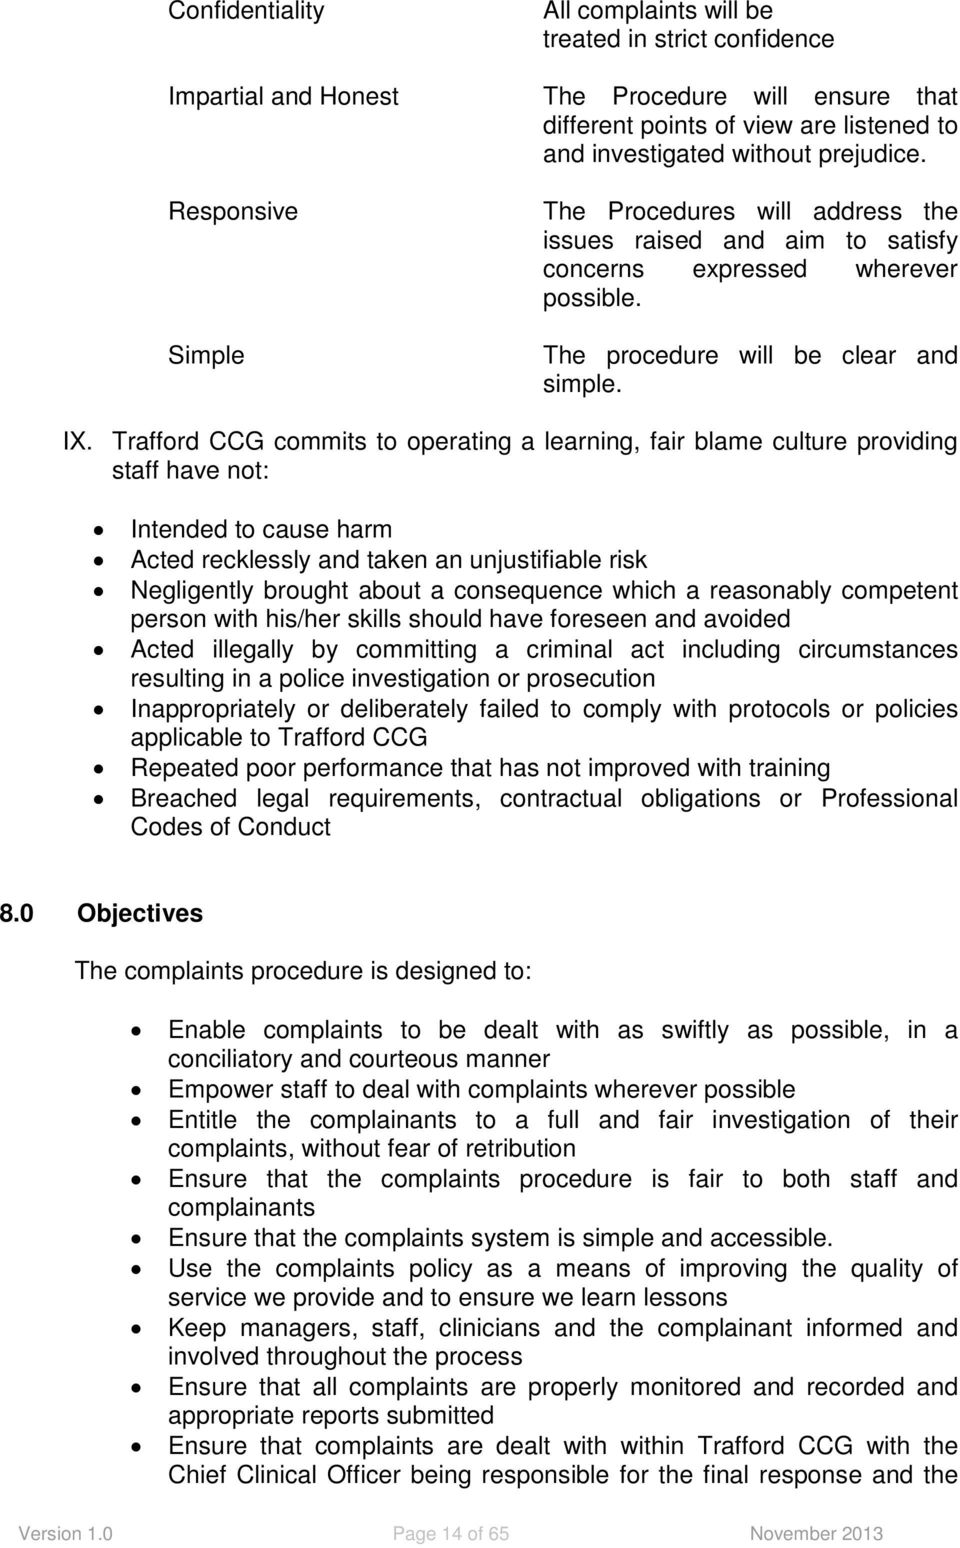 Trafford CCG commits to operating a learning, fair blame culture providing staff have not: Intended to cause harm Acted recklessly and taken an unjustifiable risk Negligently brought about a